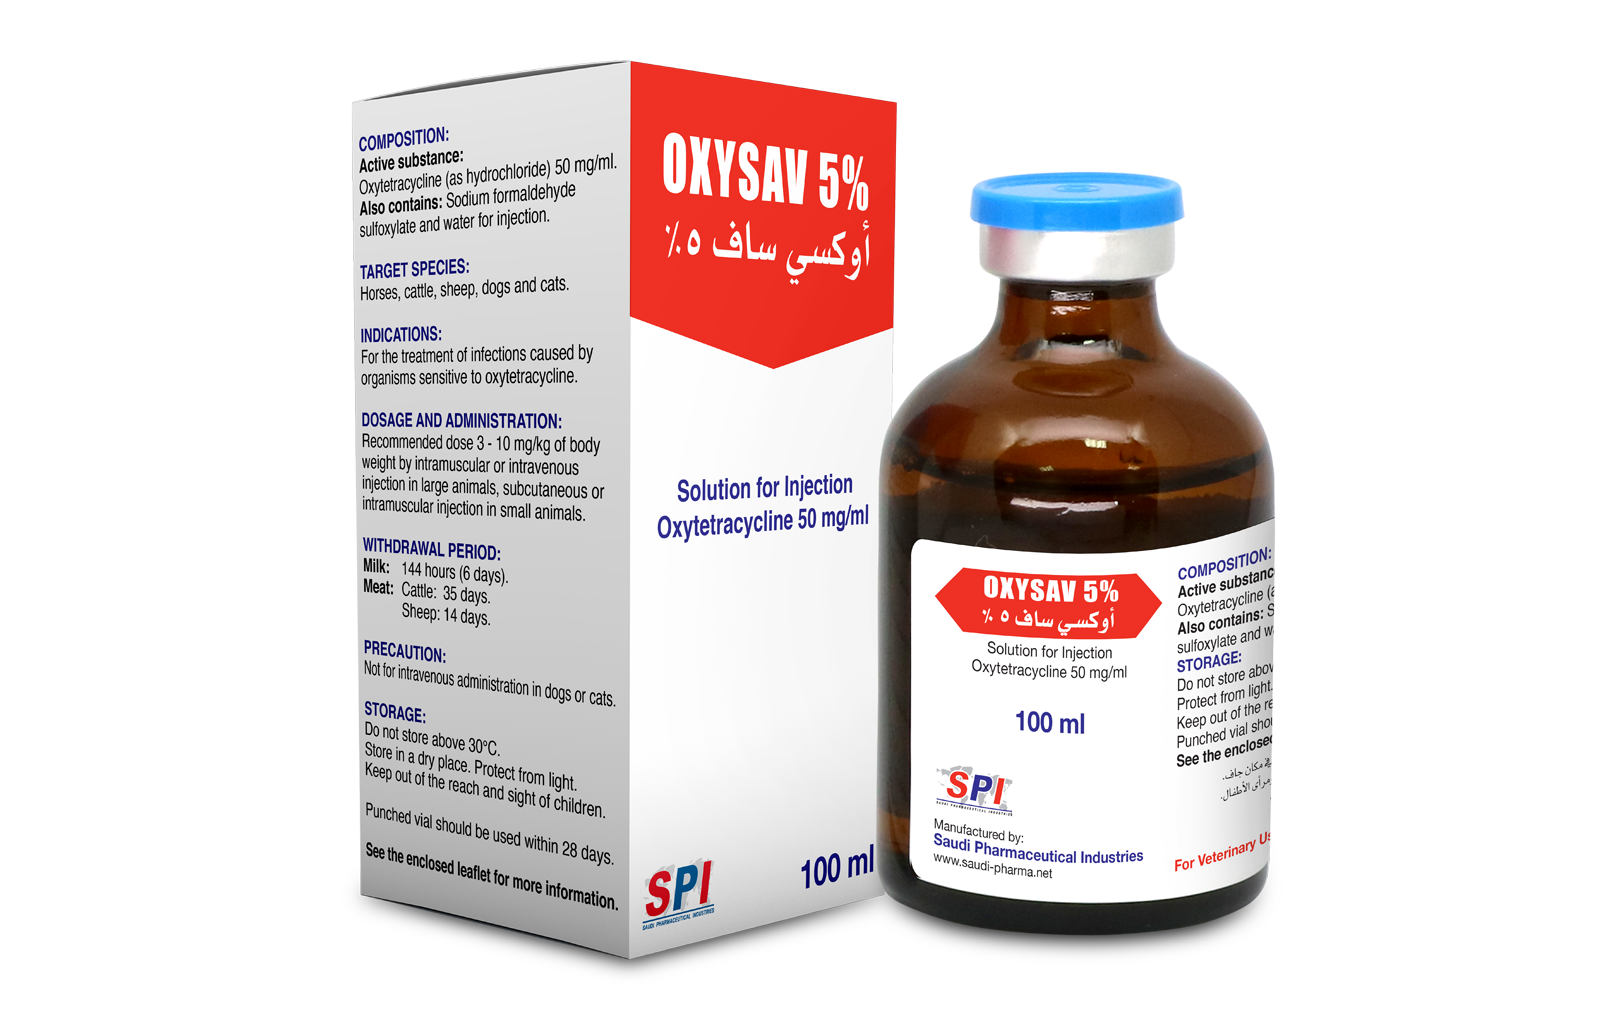 Oxy Sav 5% Solution for Injection